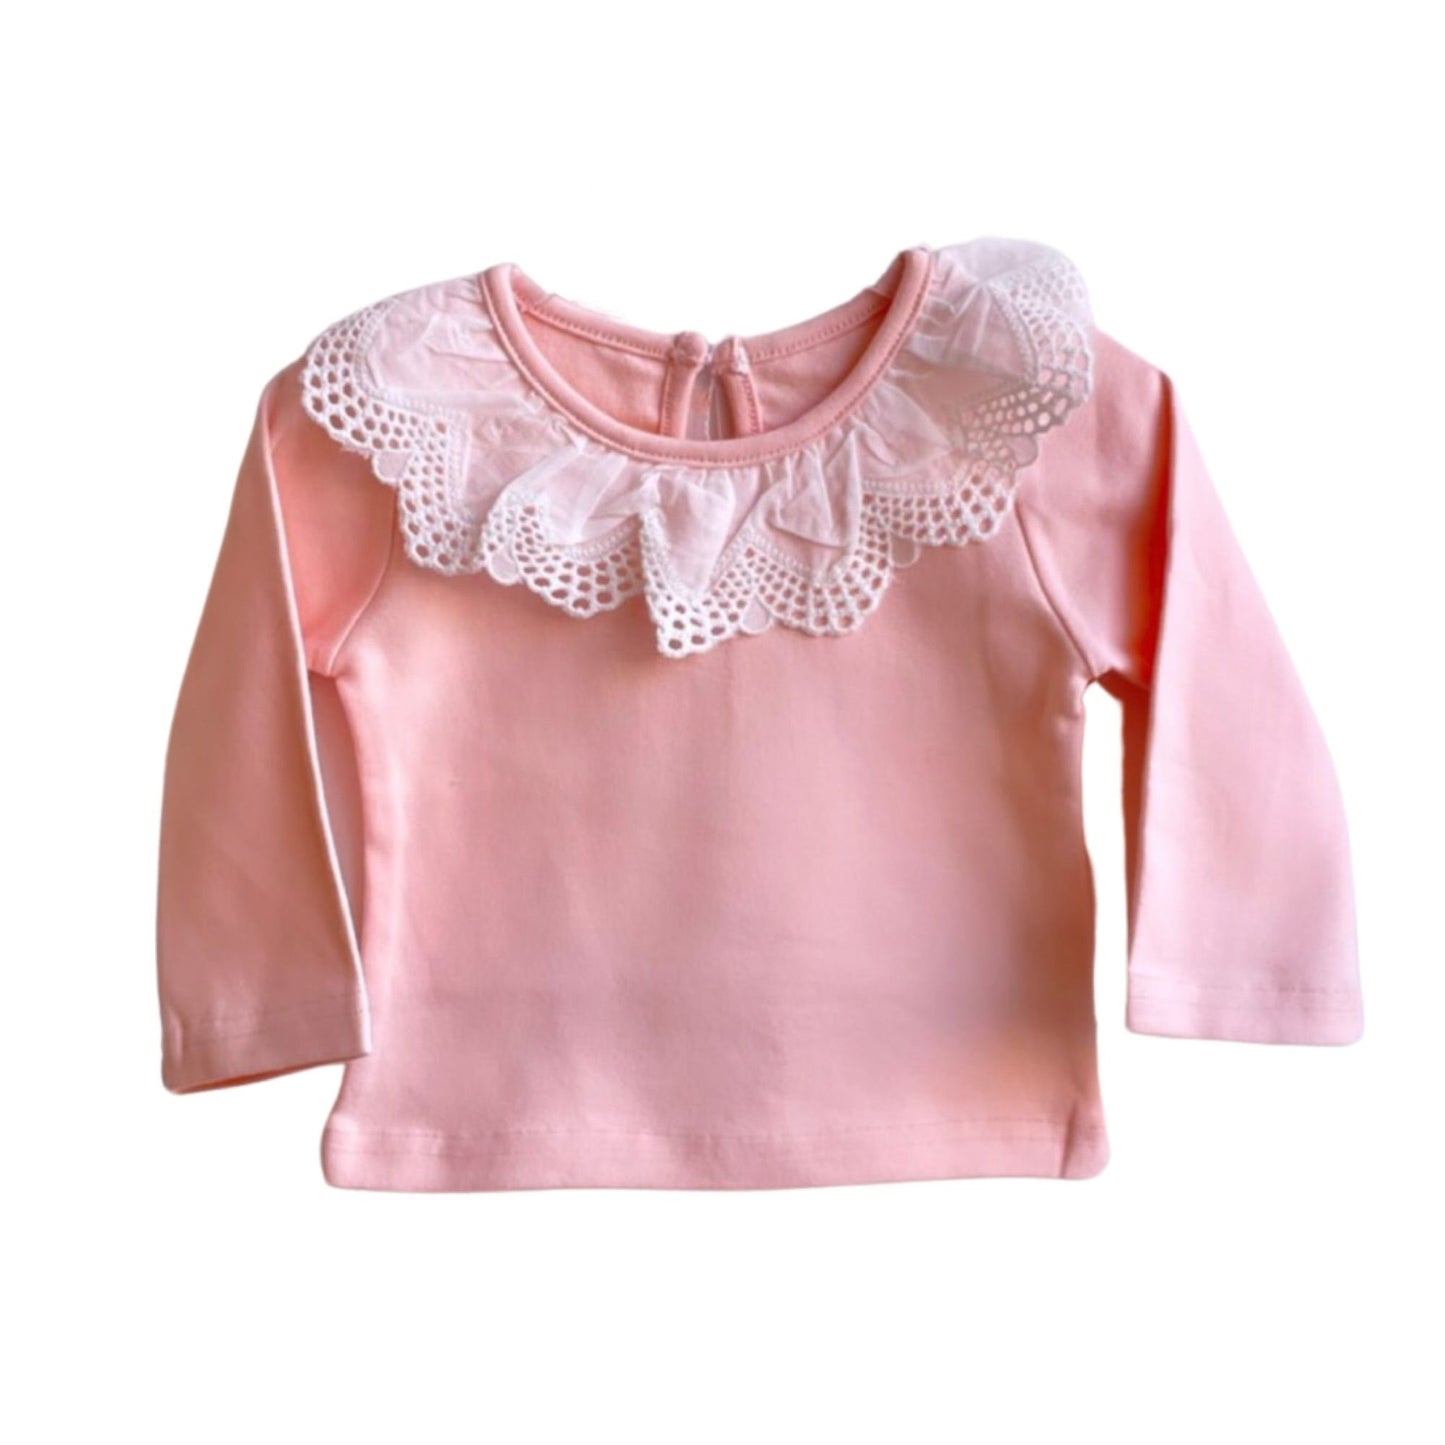 Serendipity Lace Collar Top